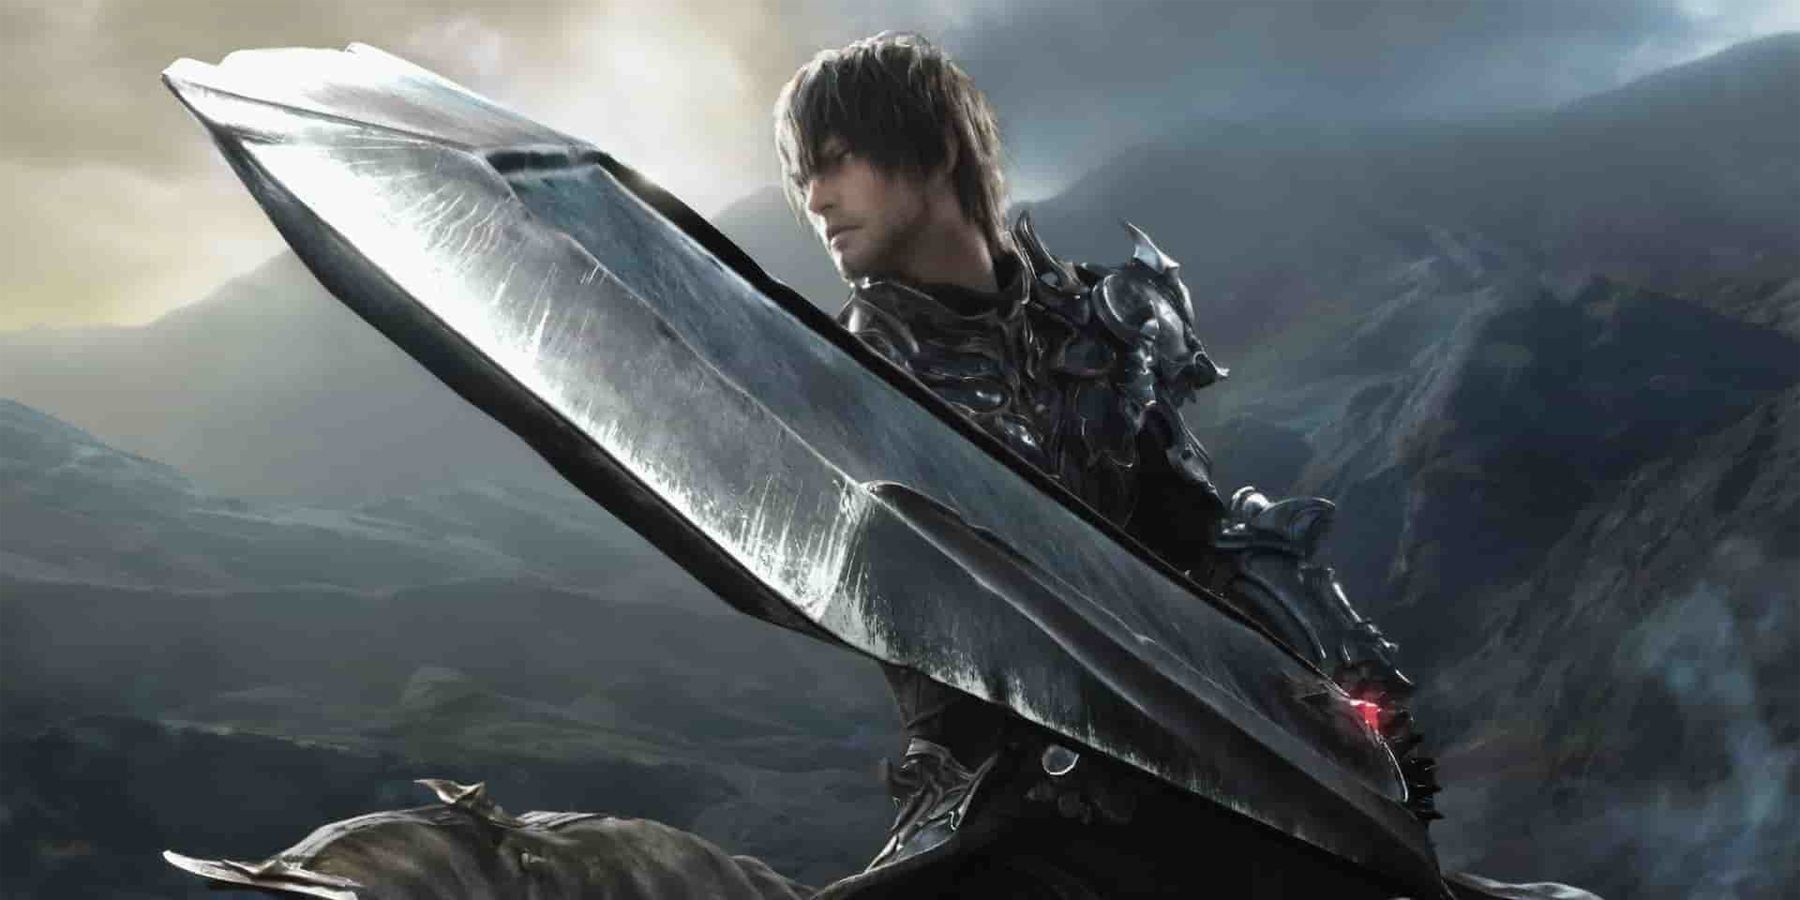 Final Fantasy 16 Will Likely Follow This Trend From The Series